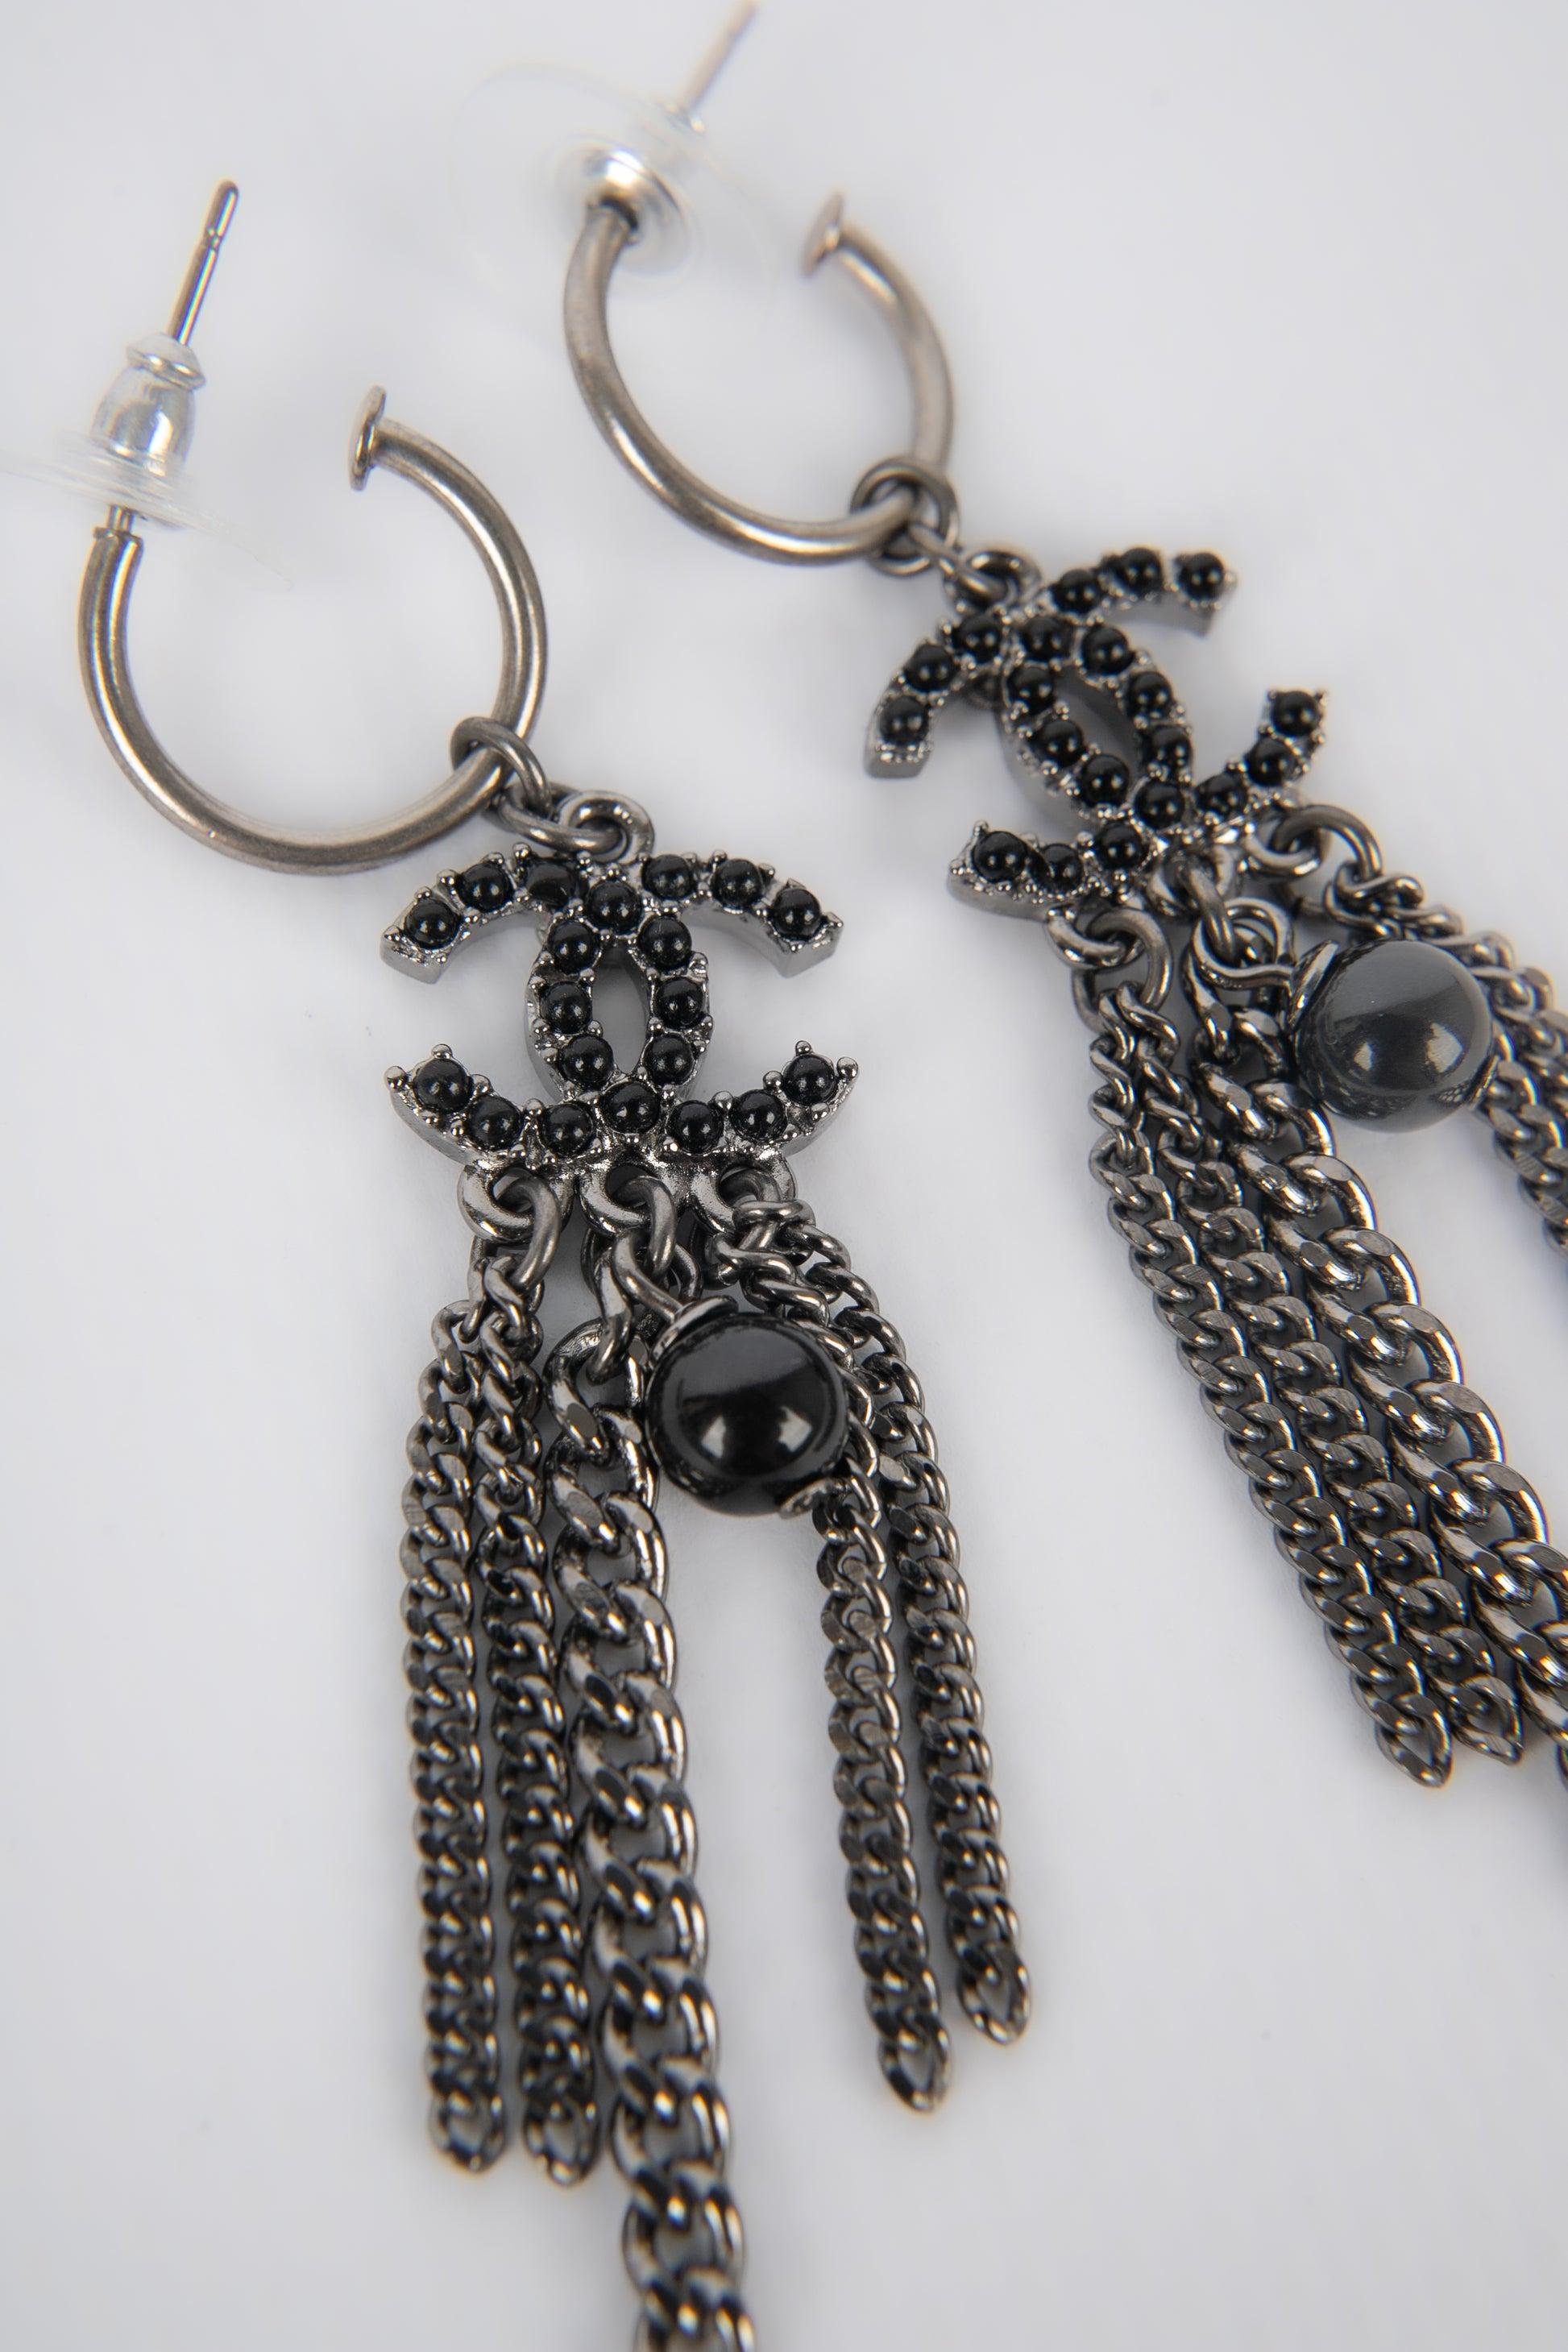 Chanel- (Made in France) Dark-silvery metal earrings. 2010 Spring-Summer Collection.

Additional information:
Condition: Very good condition
Dimensions: Height: 6.5 cm
Period: 21st Century

Seller Reference: BOB201
